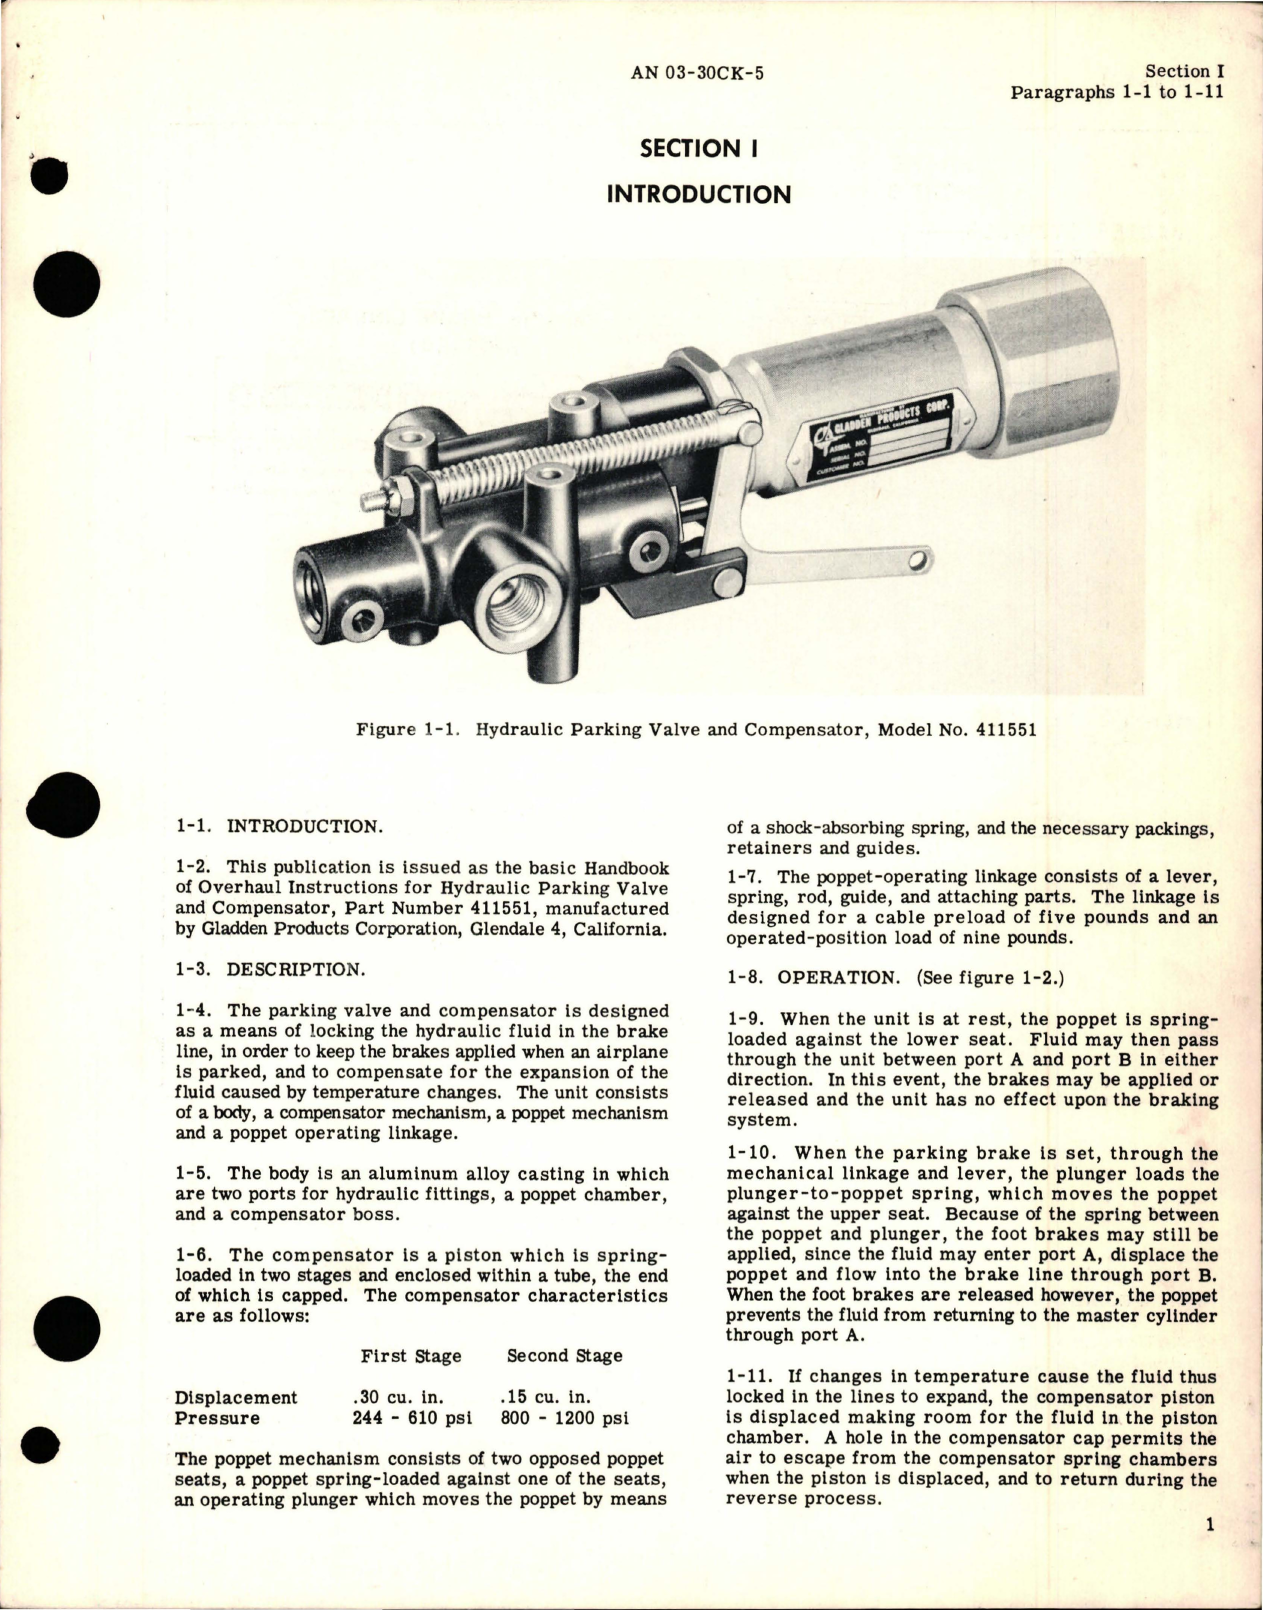 Sample page 5 from AirCorps Library document: Overhaul Instructions for Hydraulic Parking Valve and Compensator - Part 411551 